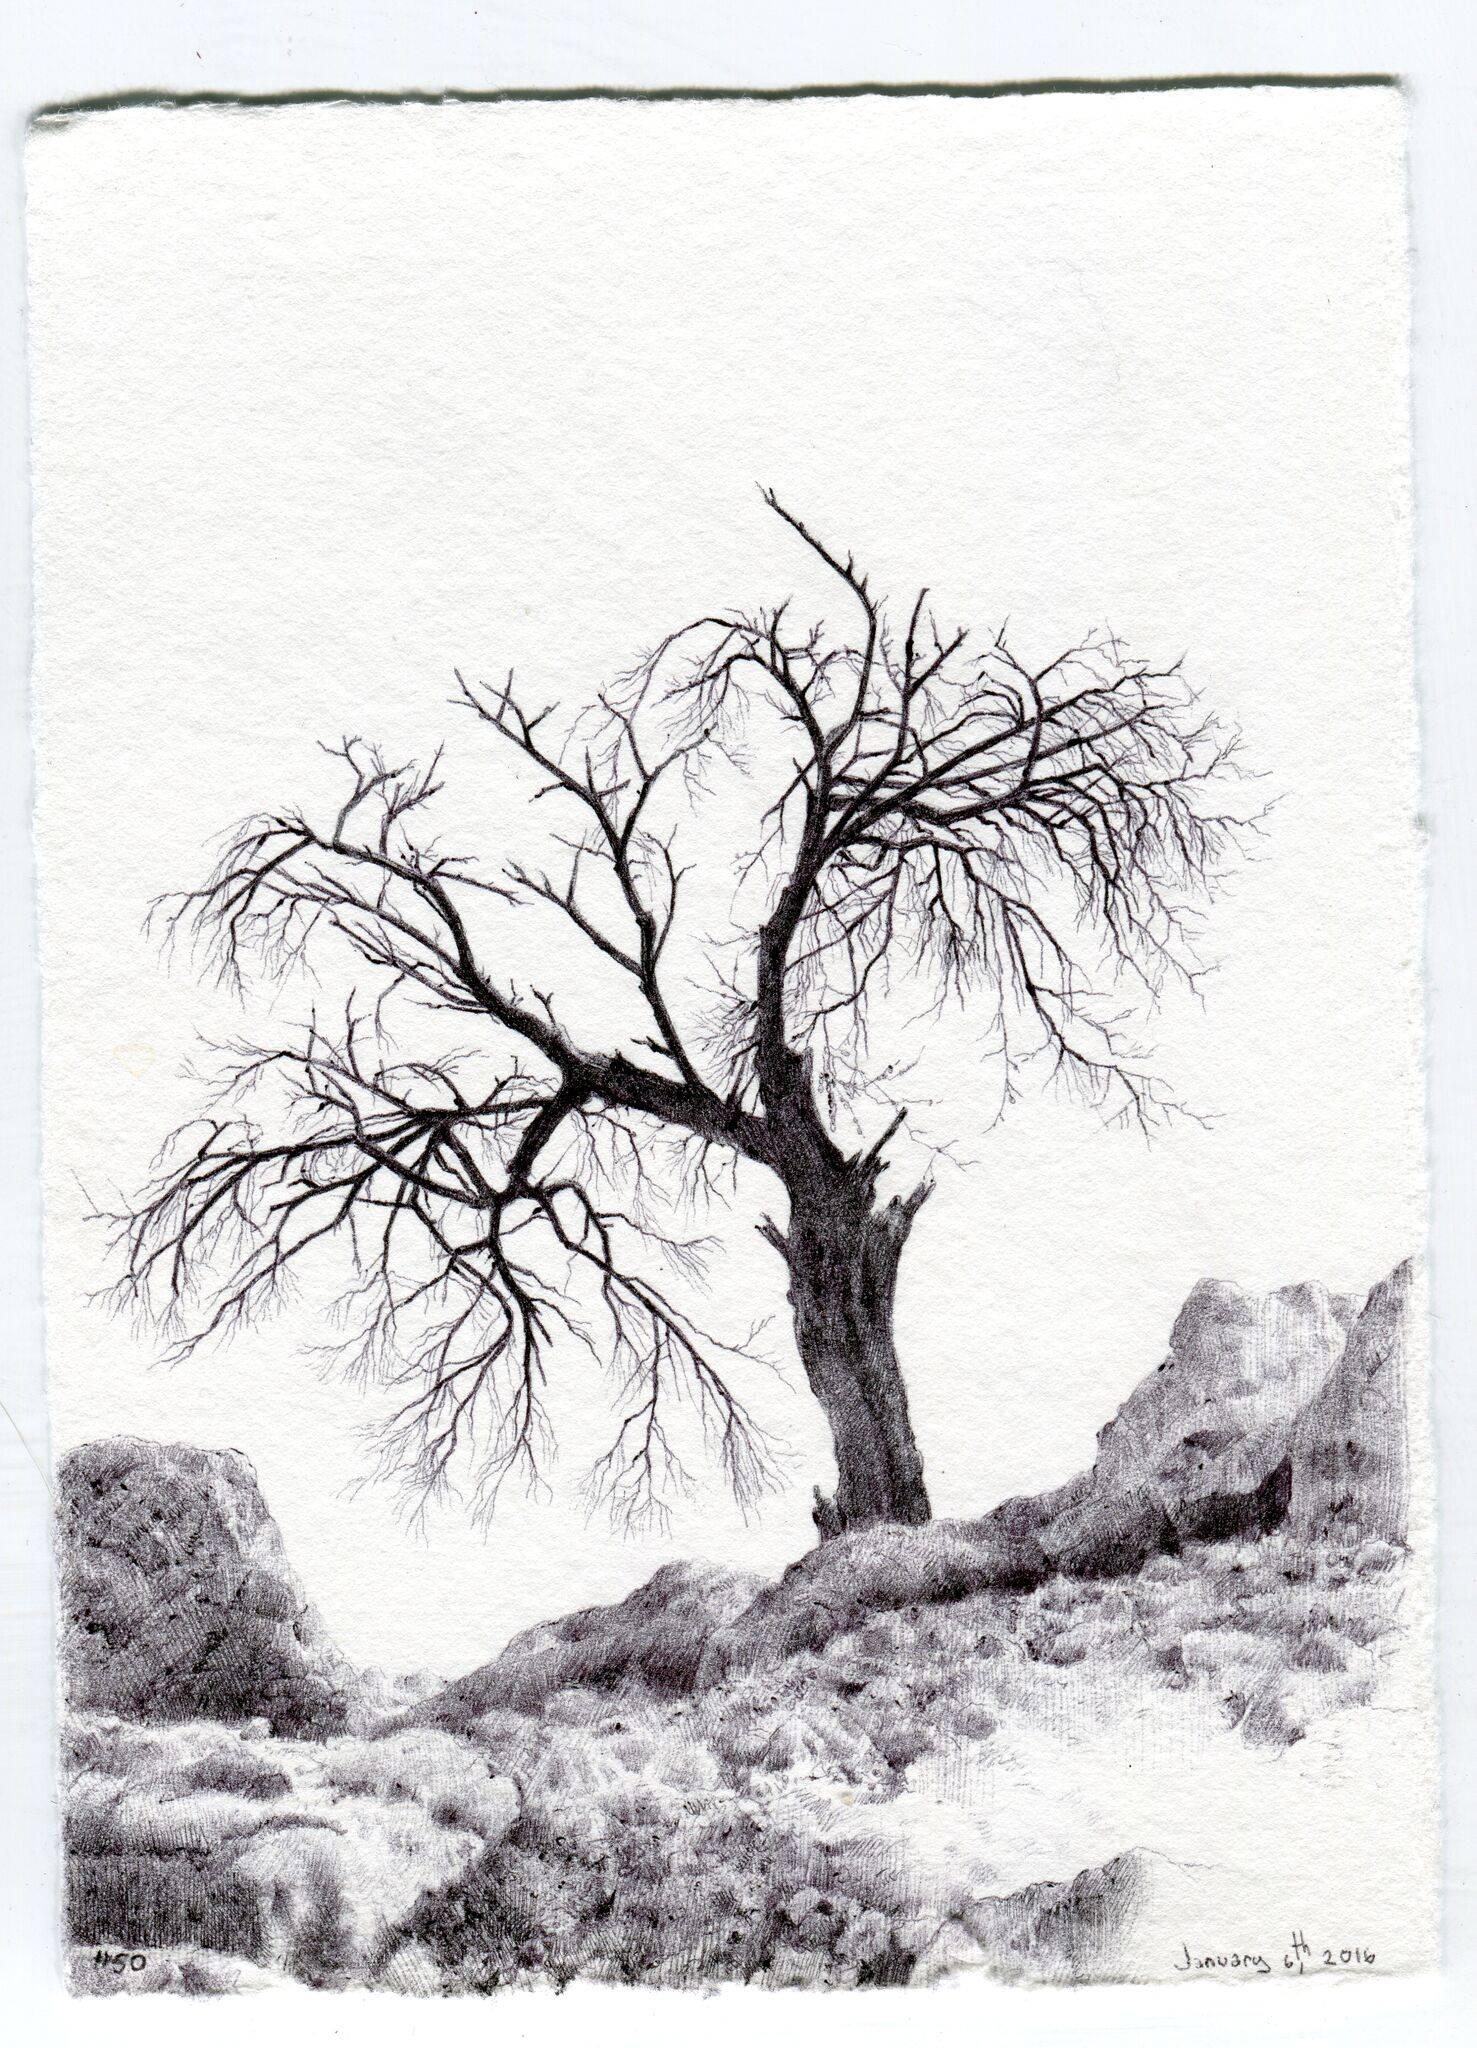 Dina Brodsky Landscape Art - Tree No. 50, March 15, 2016, contemporary landscape drawing with pen on paper